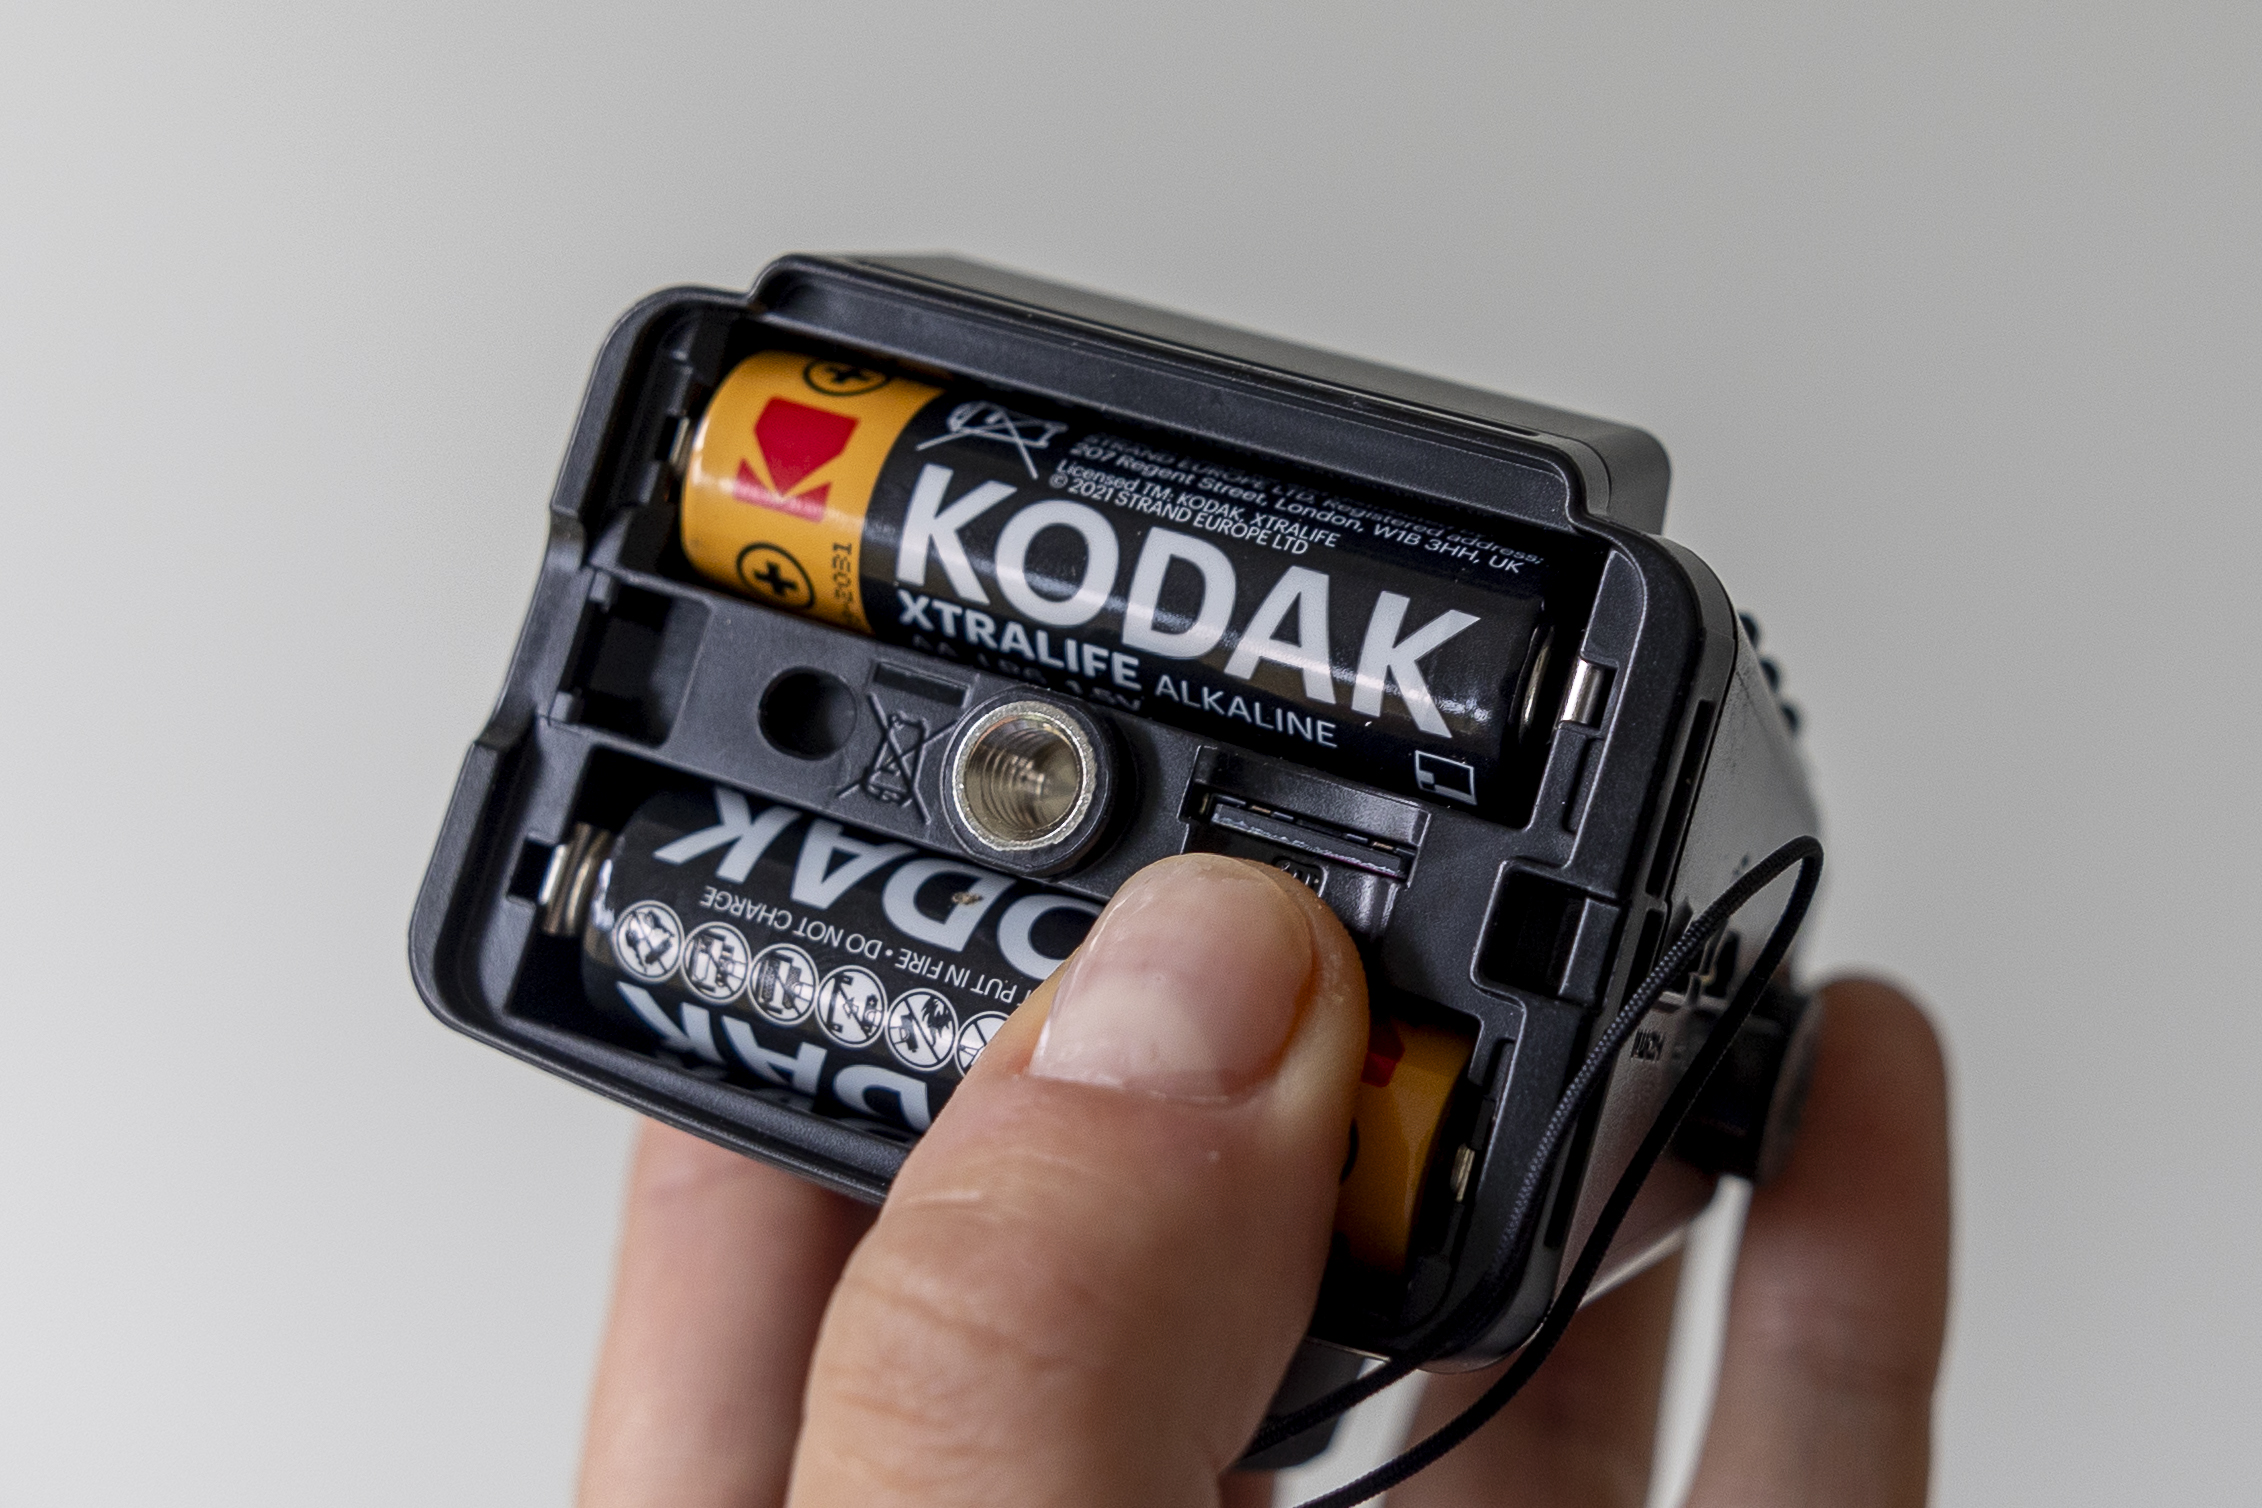 A close-up view of the battery and card slot on the Zoom Q2n-4k